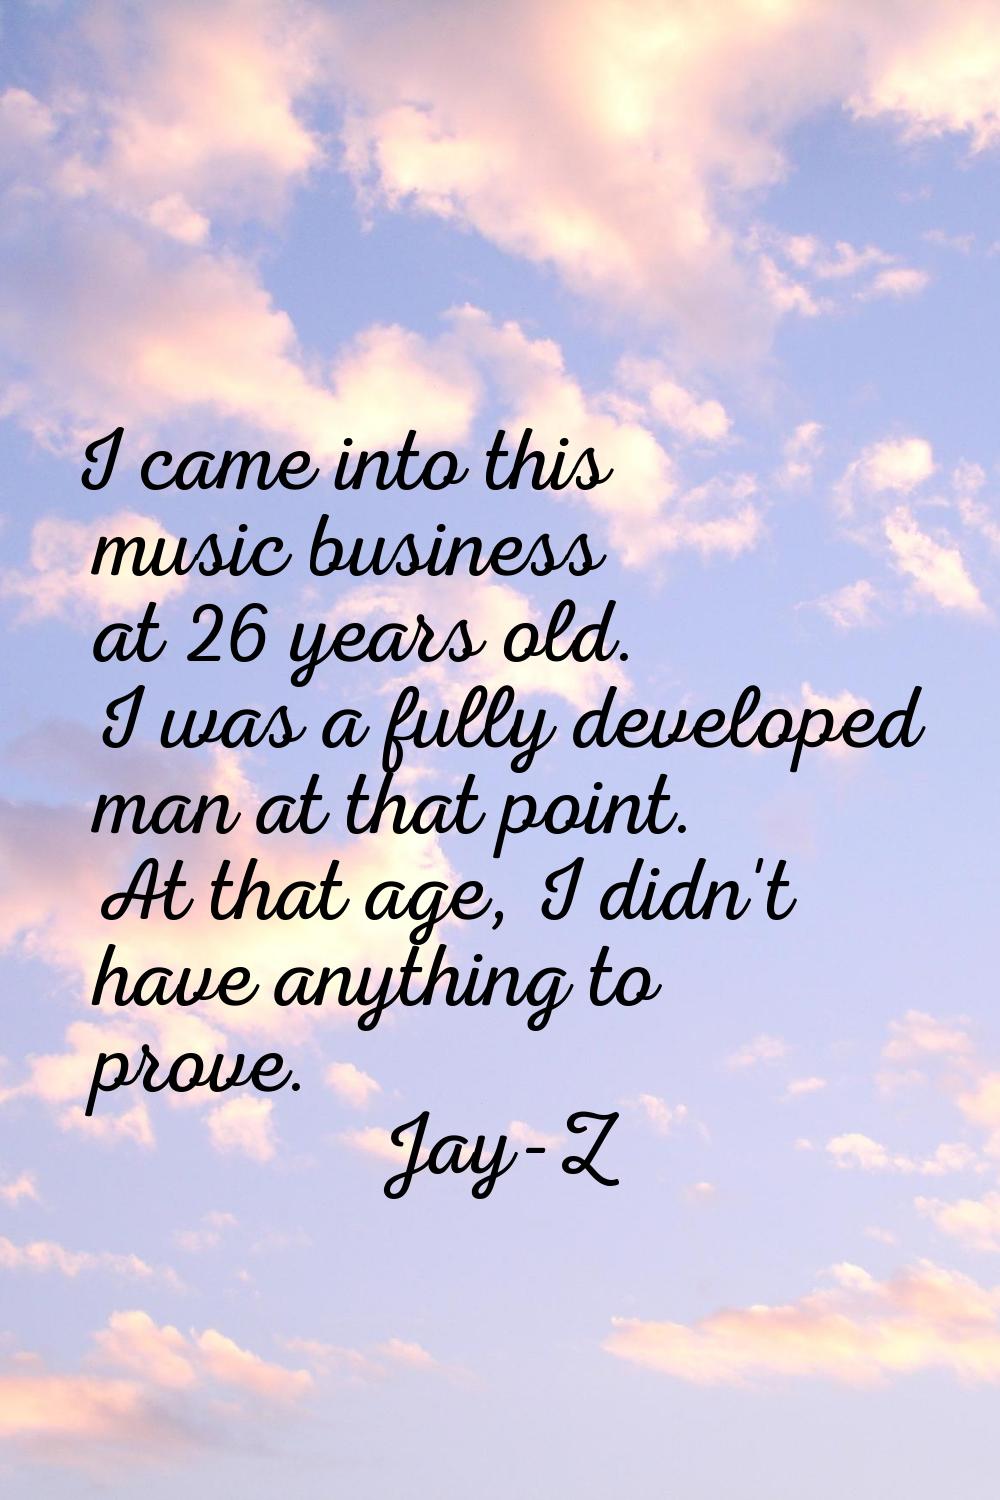 I came into this music business at 26 years old. I was a fully developed man at that point. At that